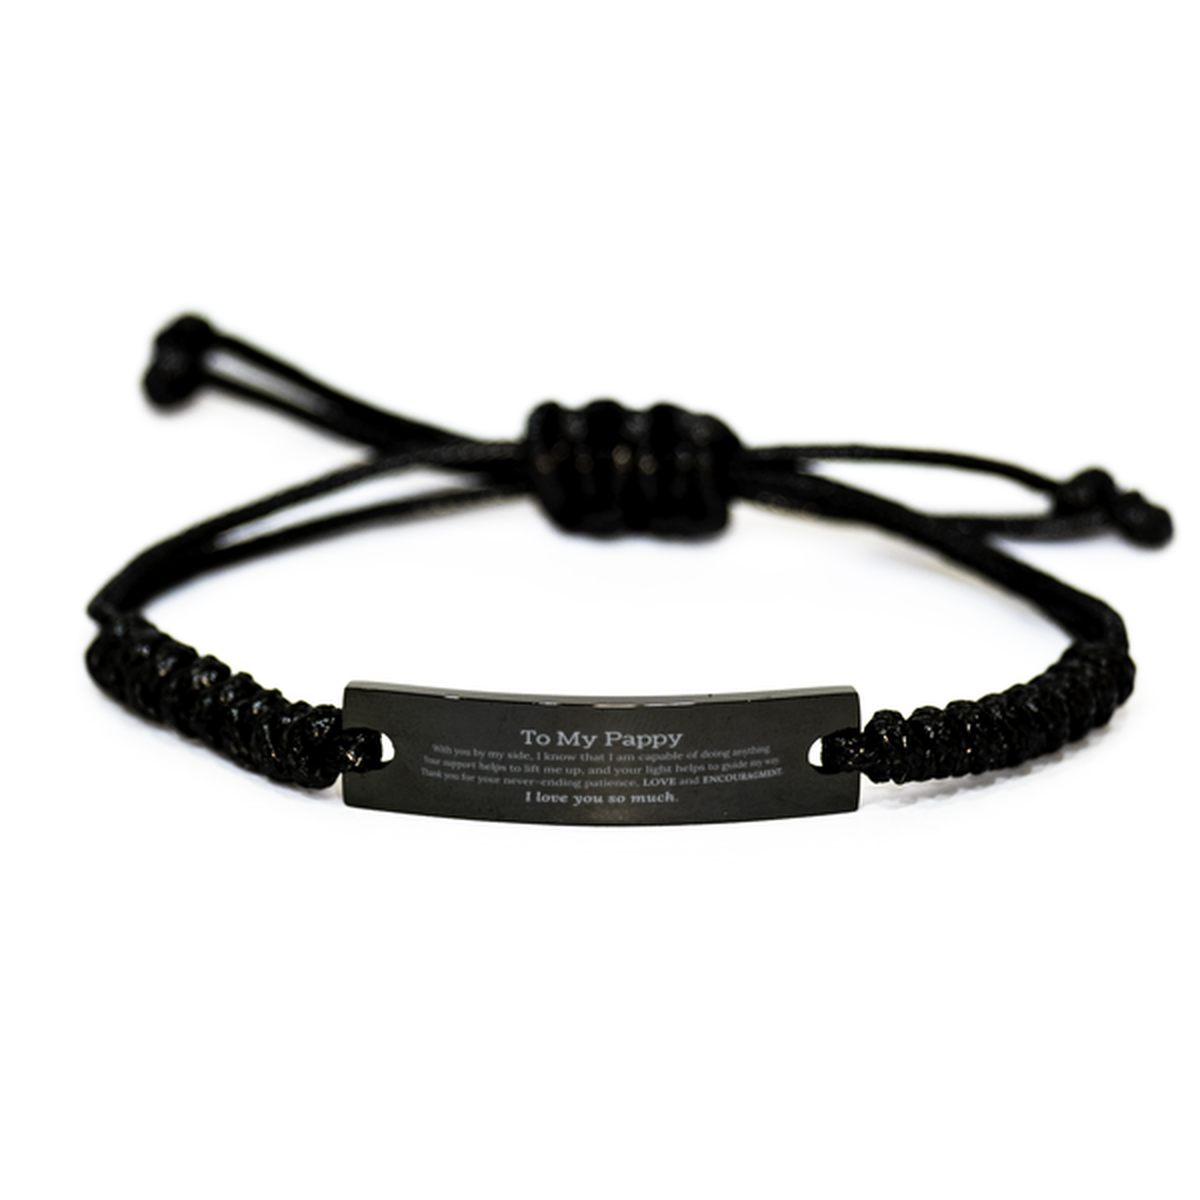 Appreciation Pappy Black Rope Bracelet Gifts, To My Pappy Birthday Christmas Wedding Keepsake Gifts for Pappy With you by my side, I know that I am capable of doing anything. I love you so much